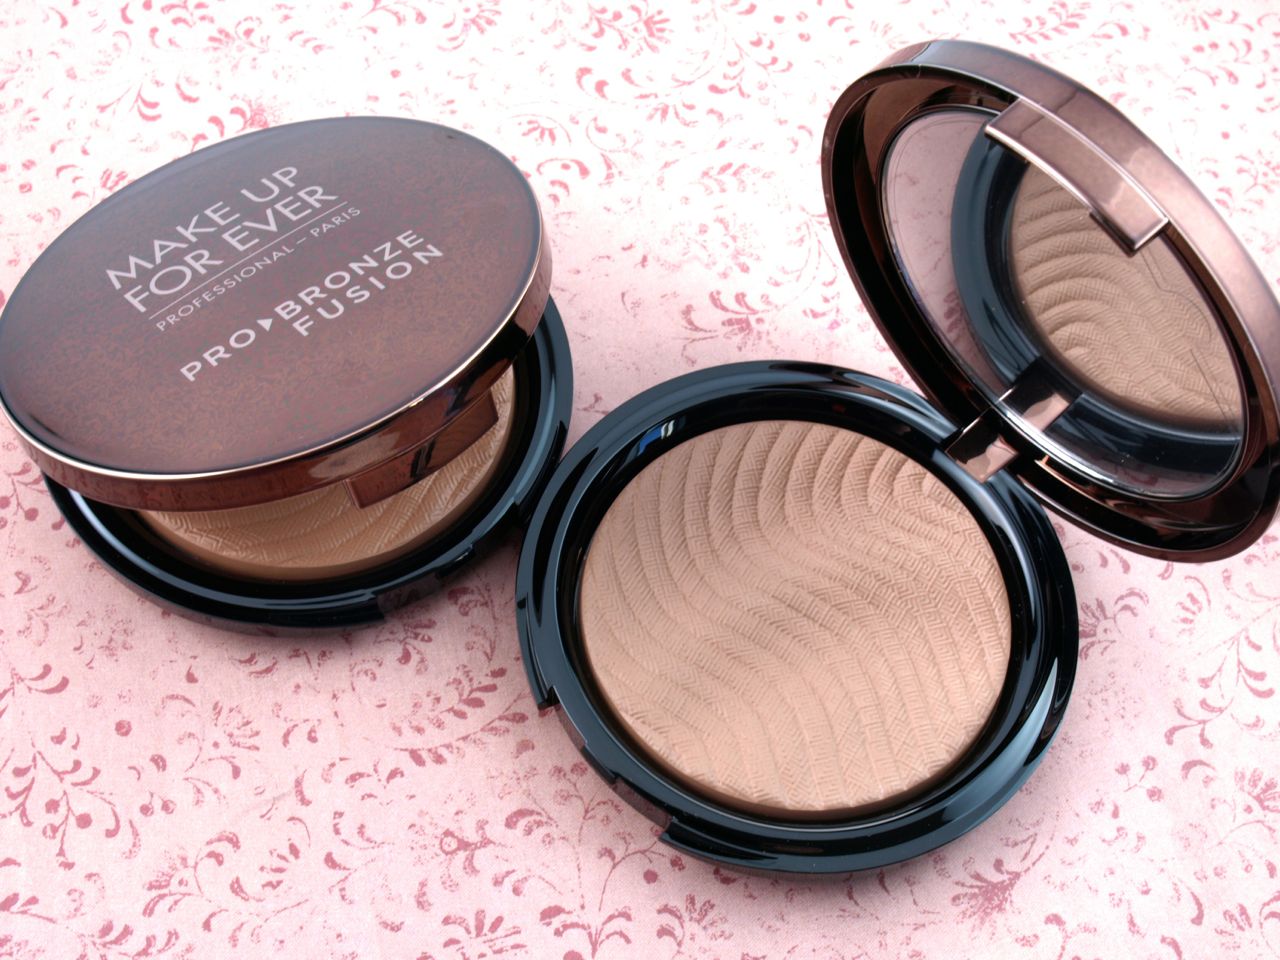 Make Up For Ever Pro Bronze Fusion Bronzers in "15I" & "10M": Review and Swatches